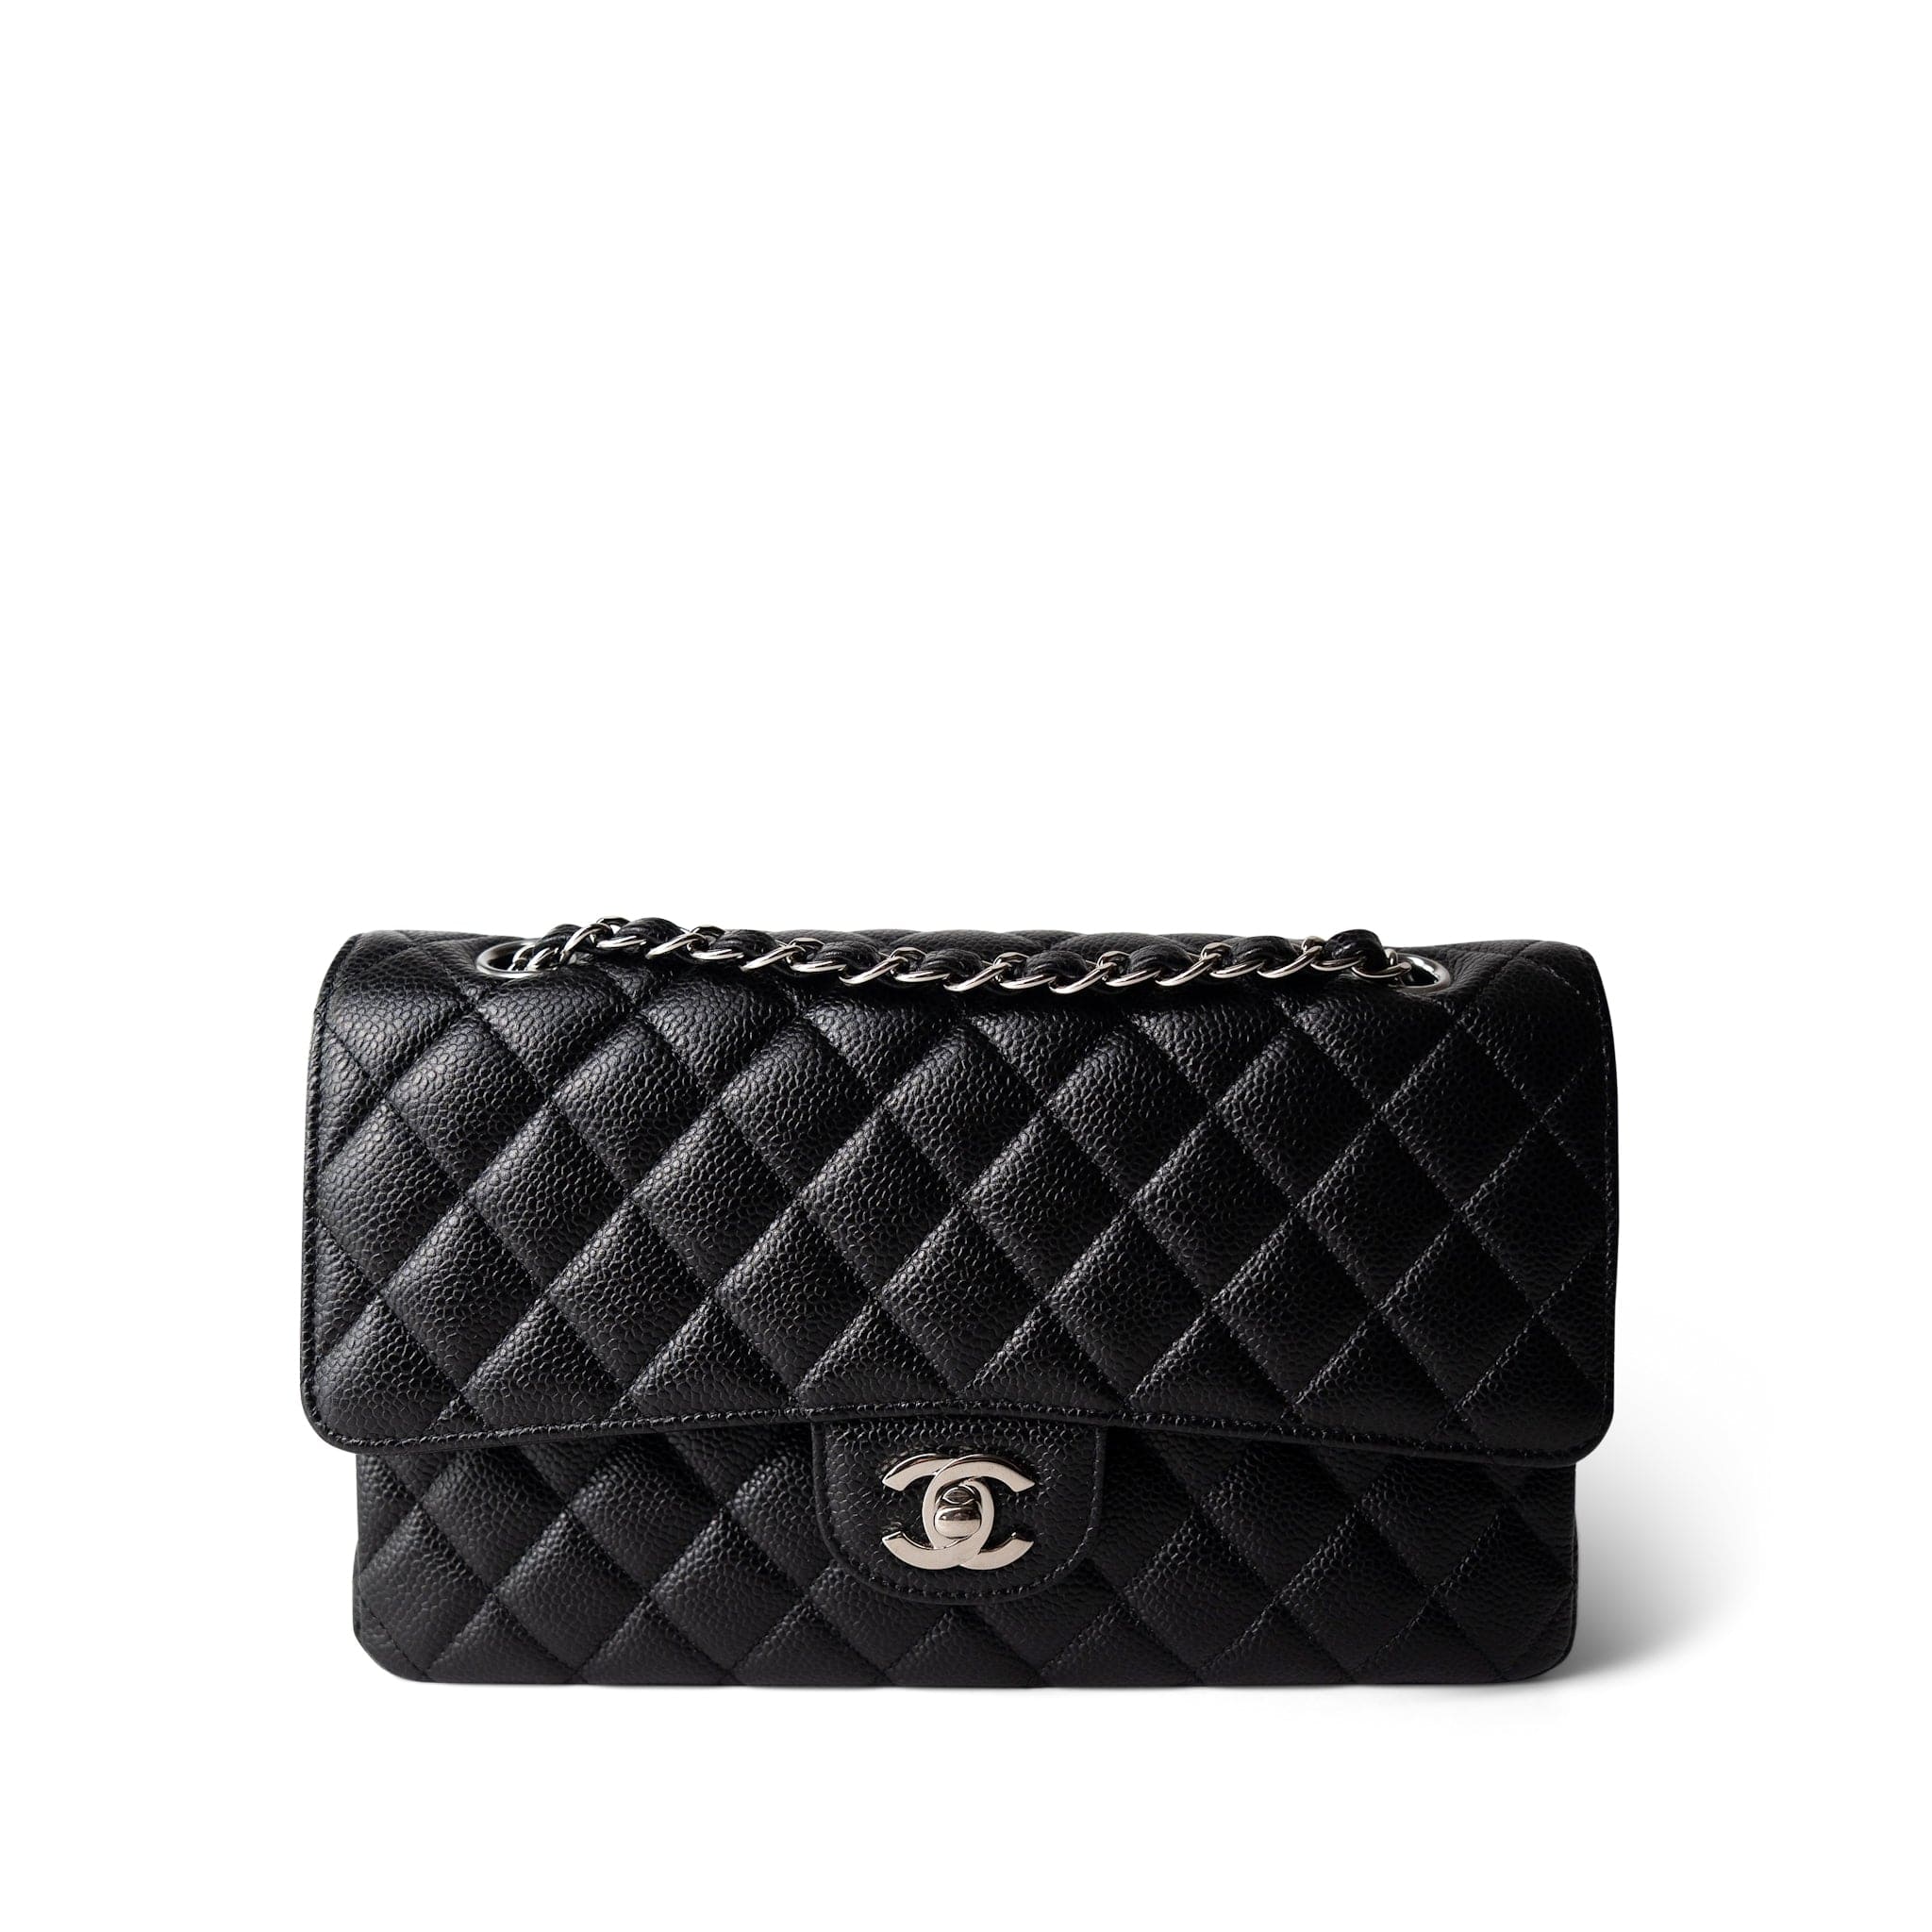 CHANEL Handbag Black Black Caviar Quilted Medium Classic Flap Silver Hardware - Redeluxe